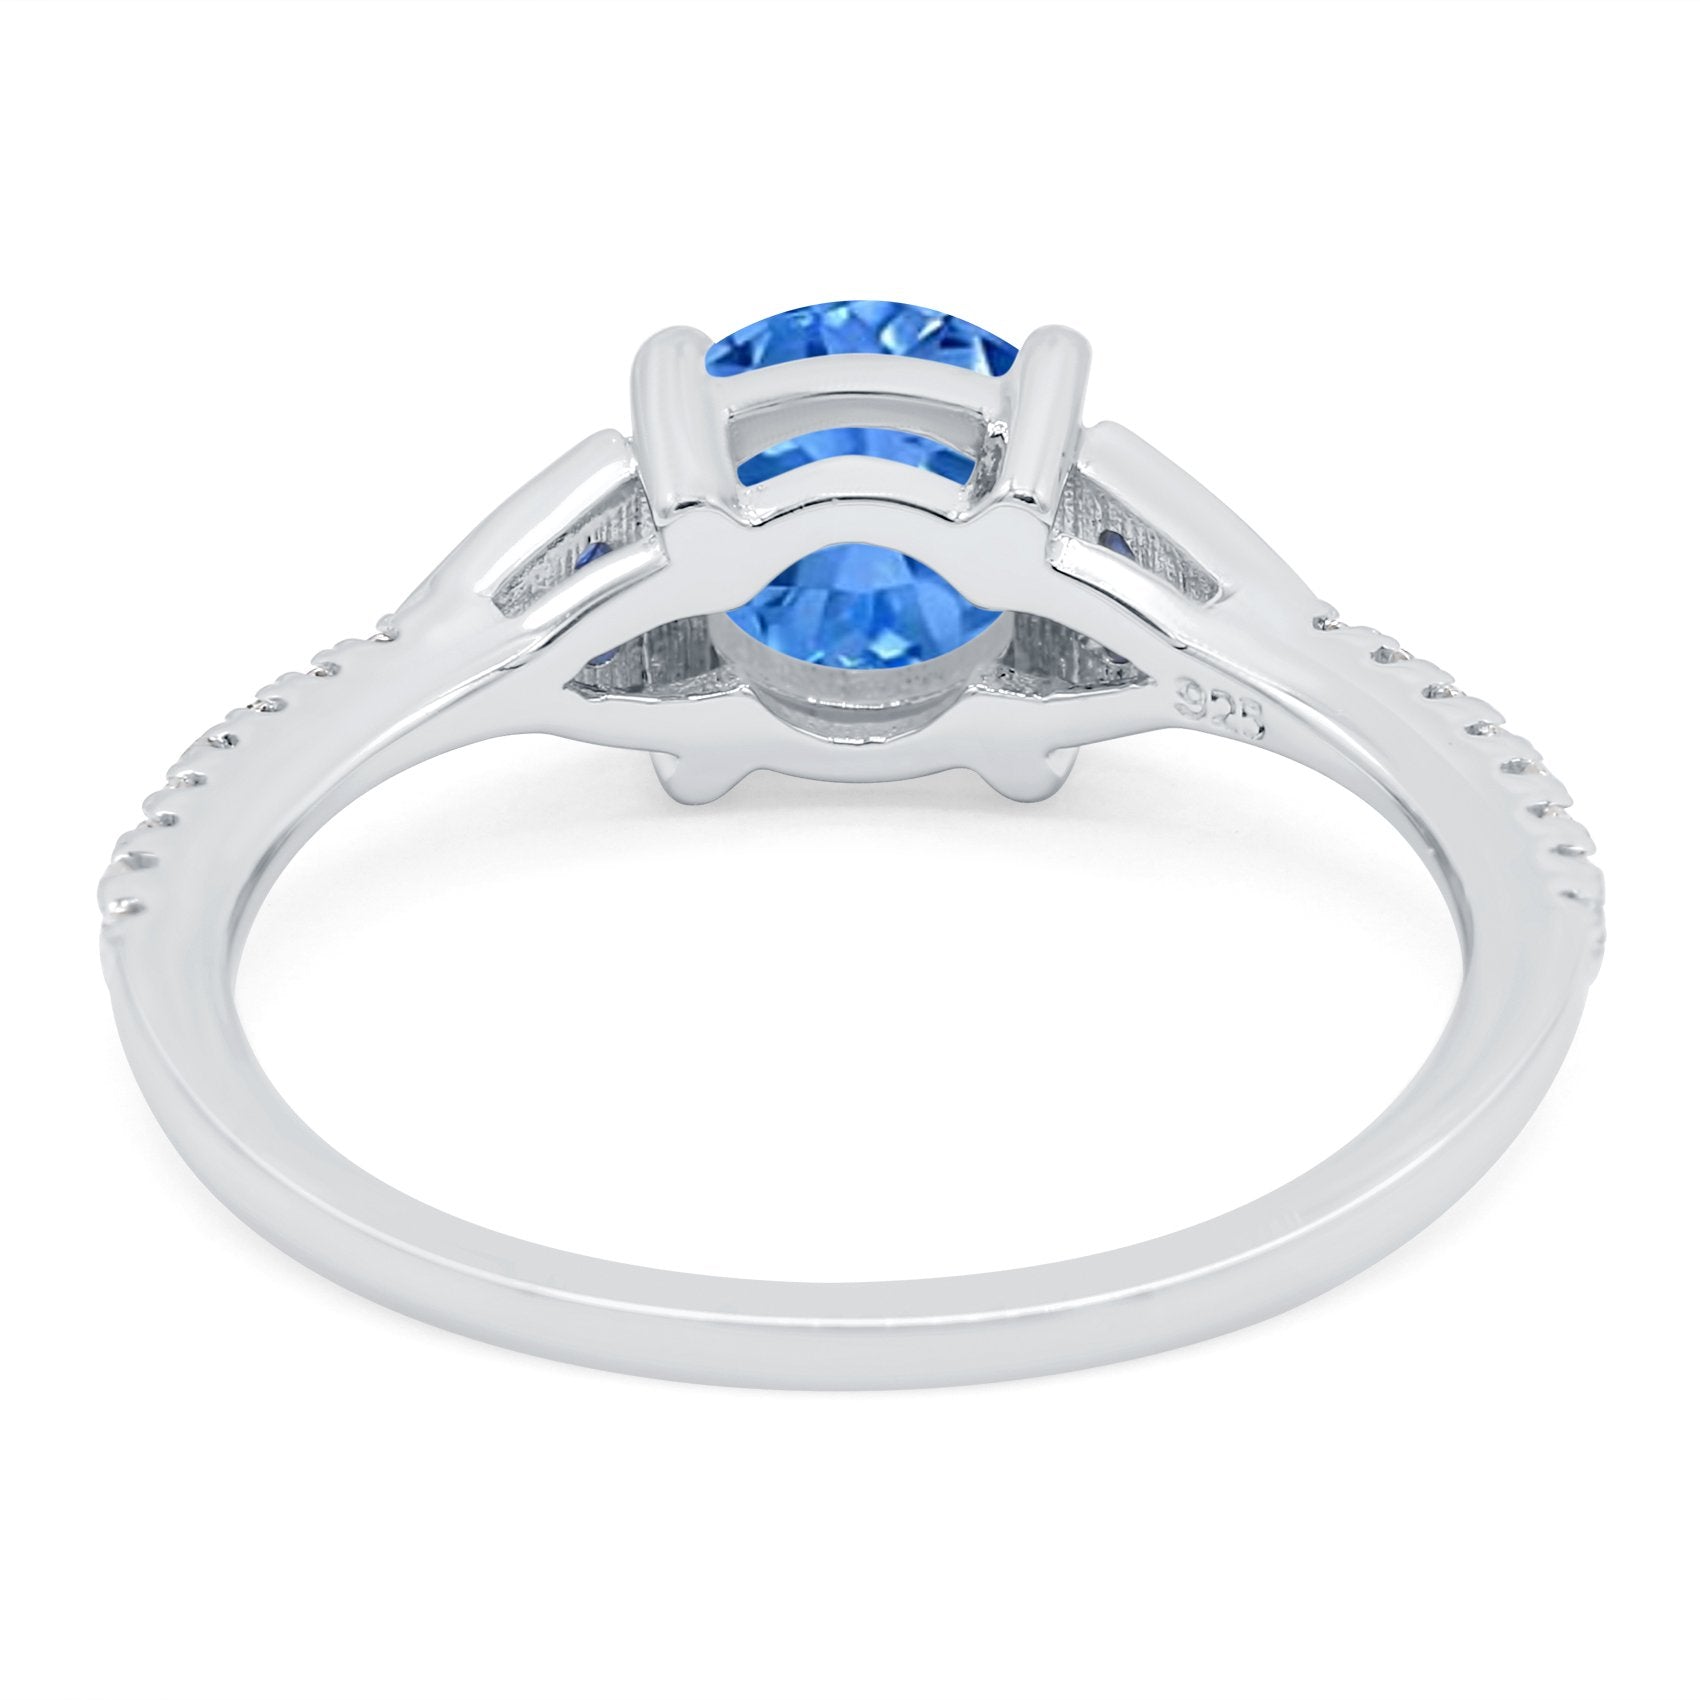 Art Deco Wedding Engagement Bridal Ring Round Simulated Blue Sapphire Cubic Zirconia 925 Sterling Silver